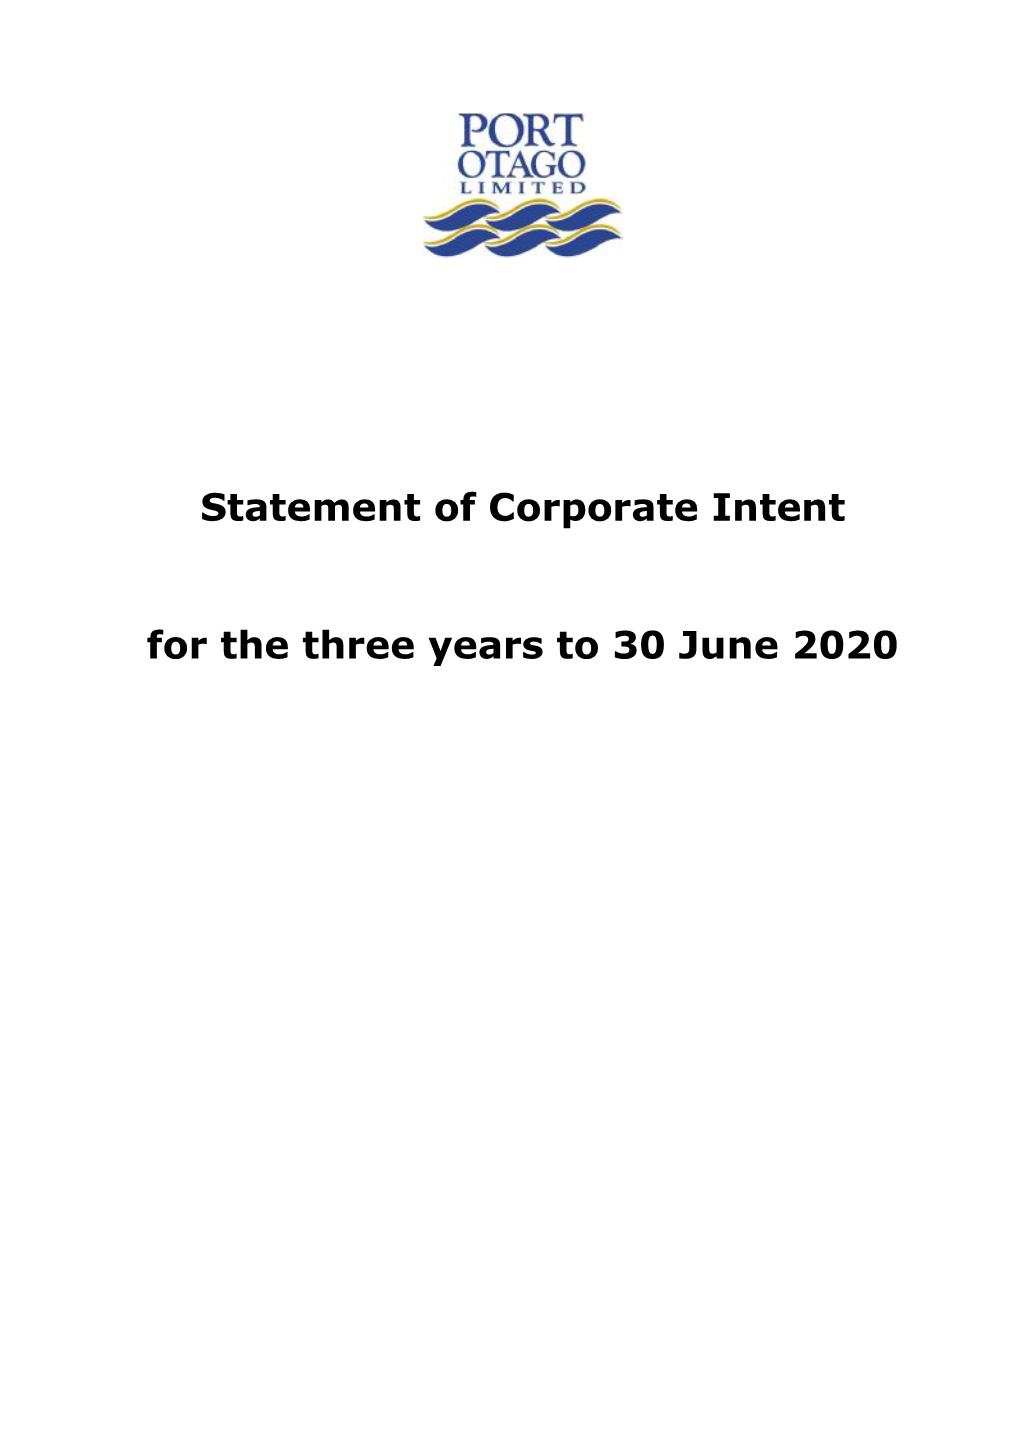 Statement of Corporate Intent for the Three Years to 30 June 2020